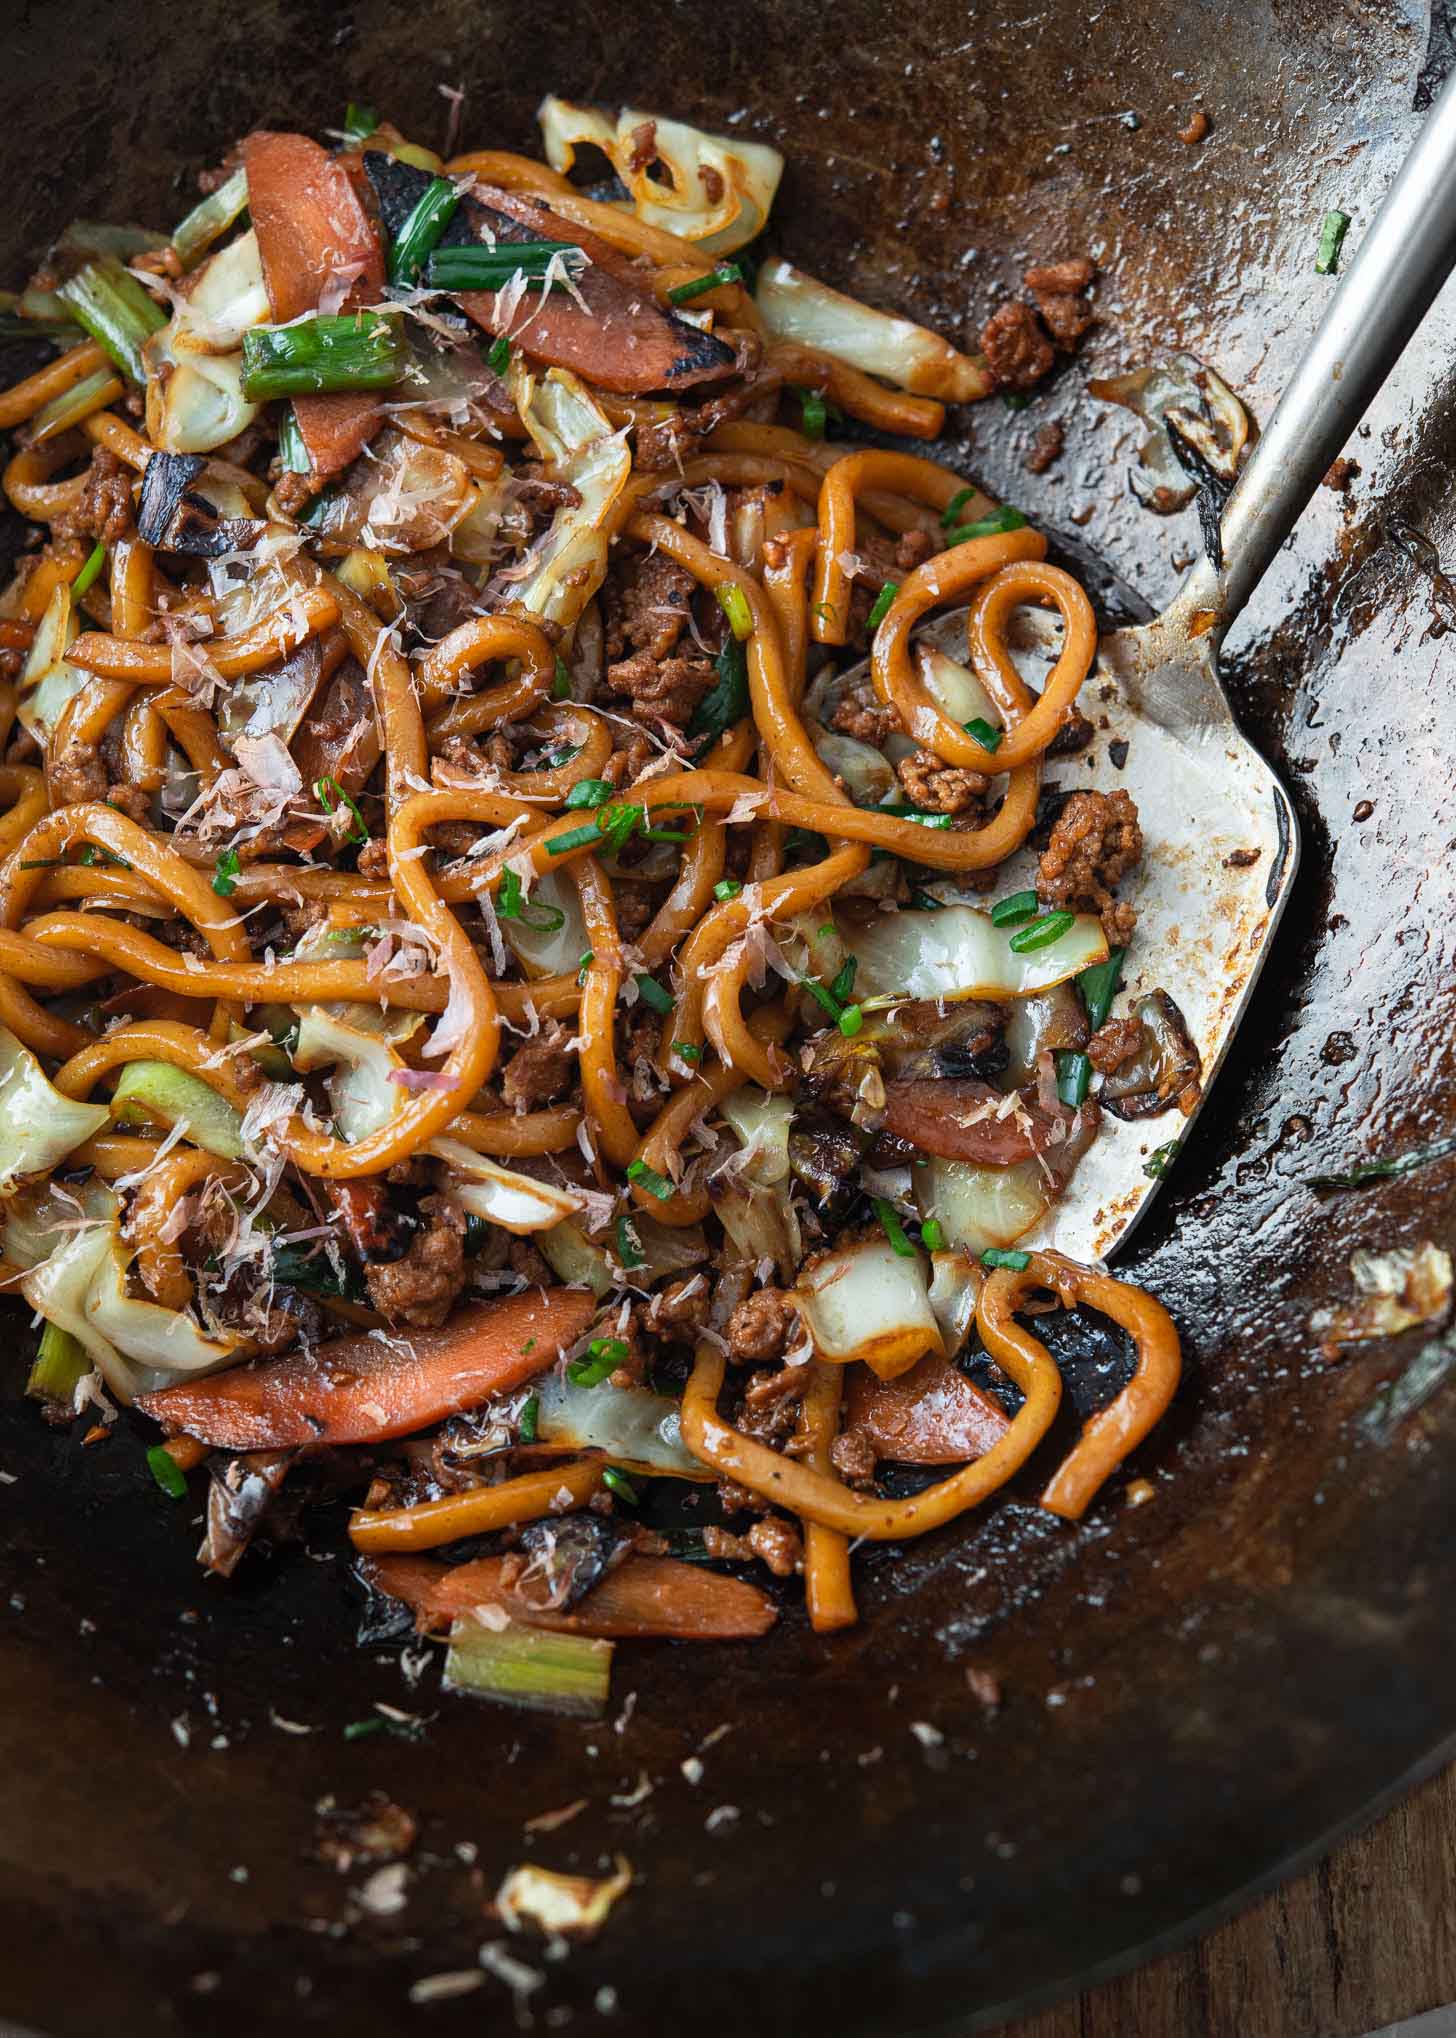 Stir-fried yaki udon noodles with pork and vegetables in a wok.